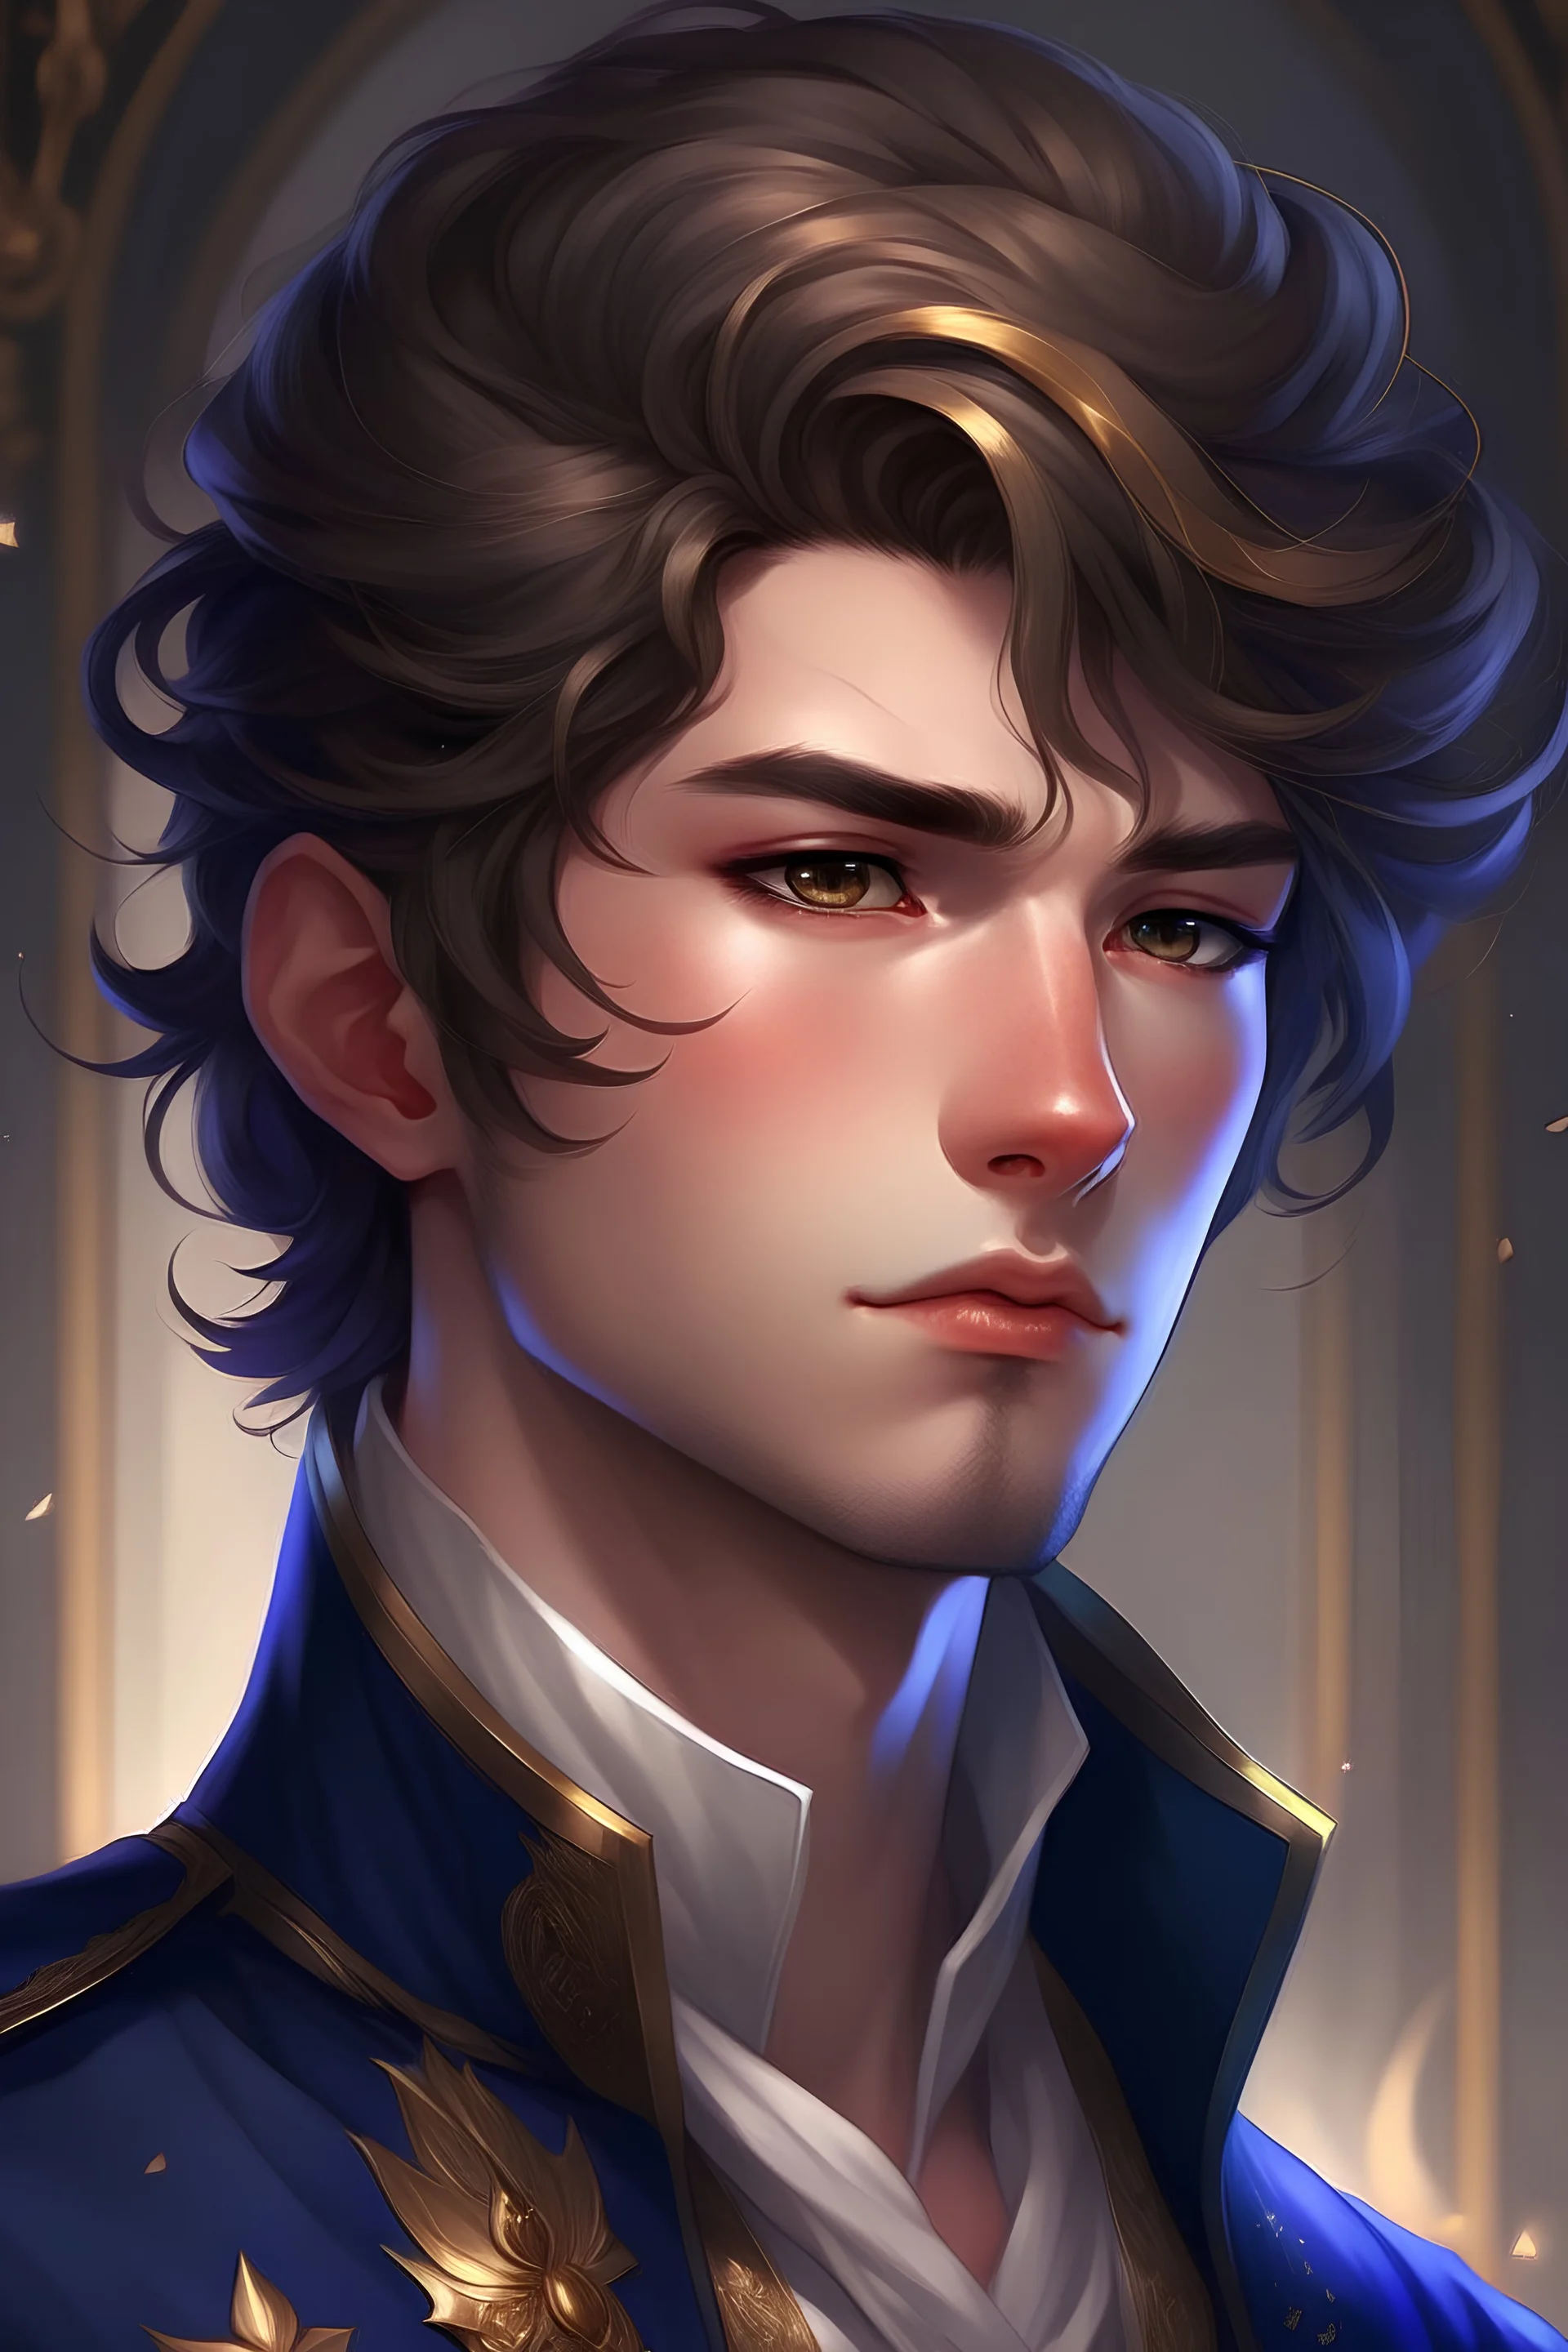 An extremely handsome prince, portrait, semi realism, anime male protagonist, book cover, looking cool and fierce, hair up, full view